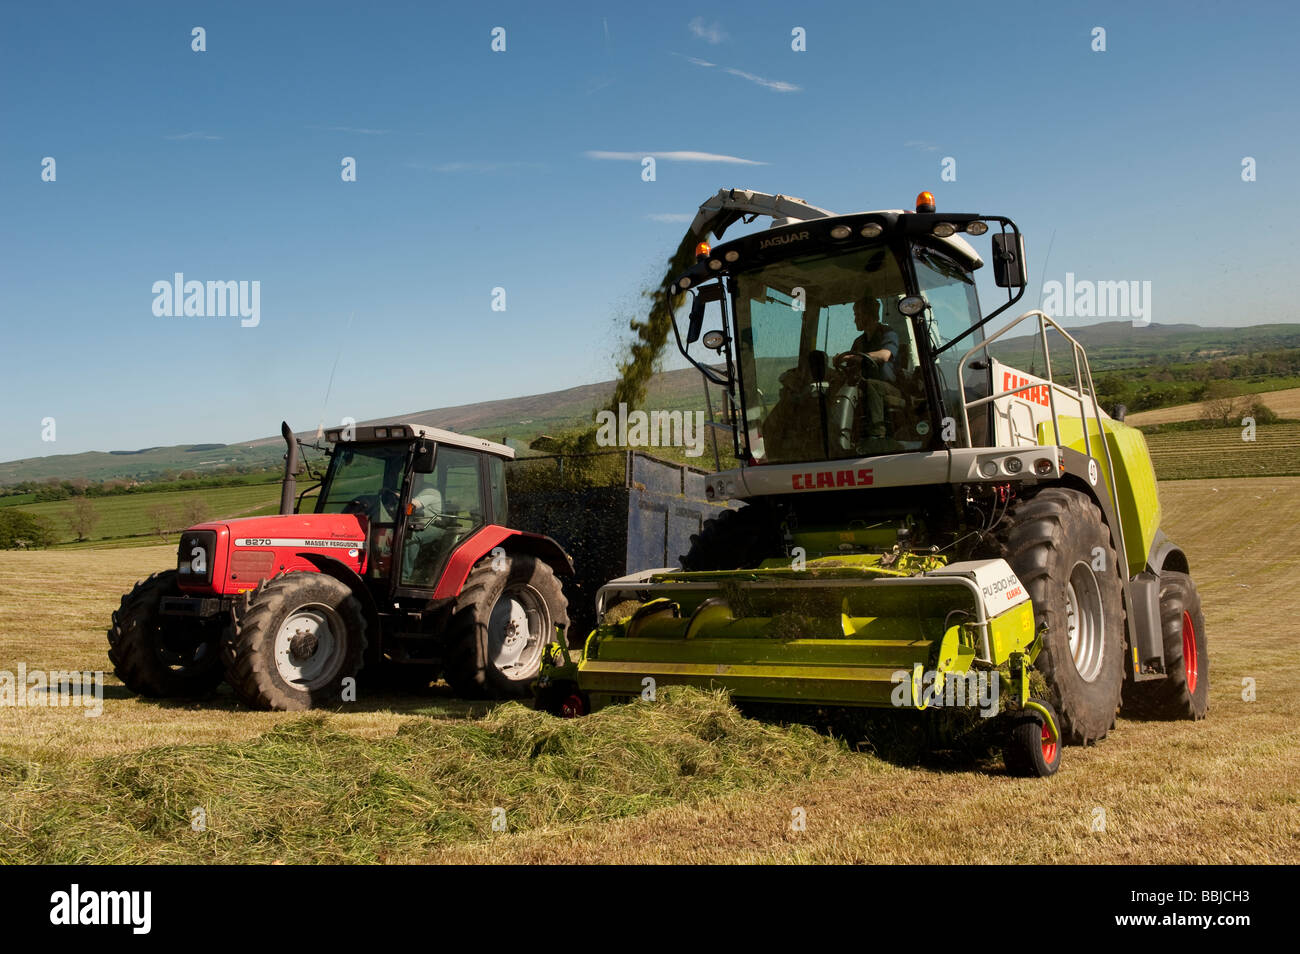 Claas 940 self propelled forage harvestor working in field Filling trailers with chopped grass Cumbria  Stock Photo